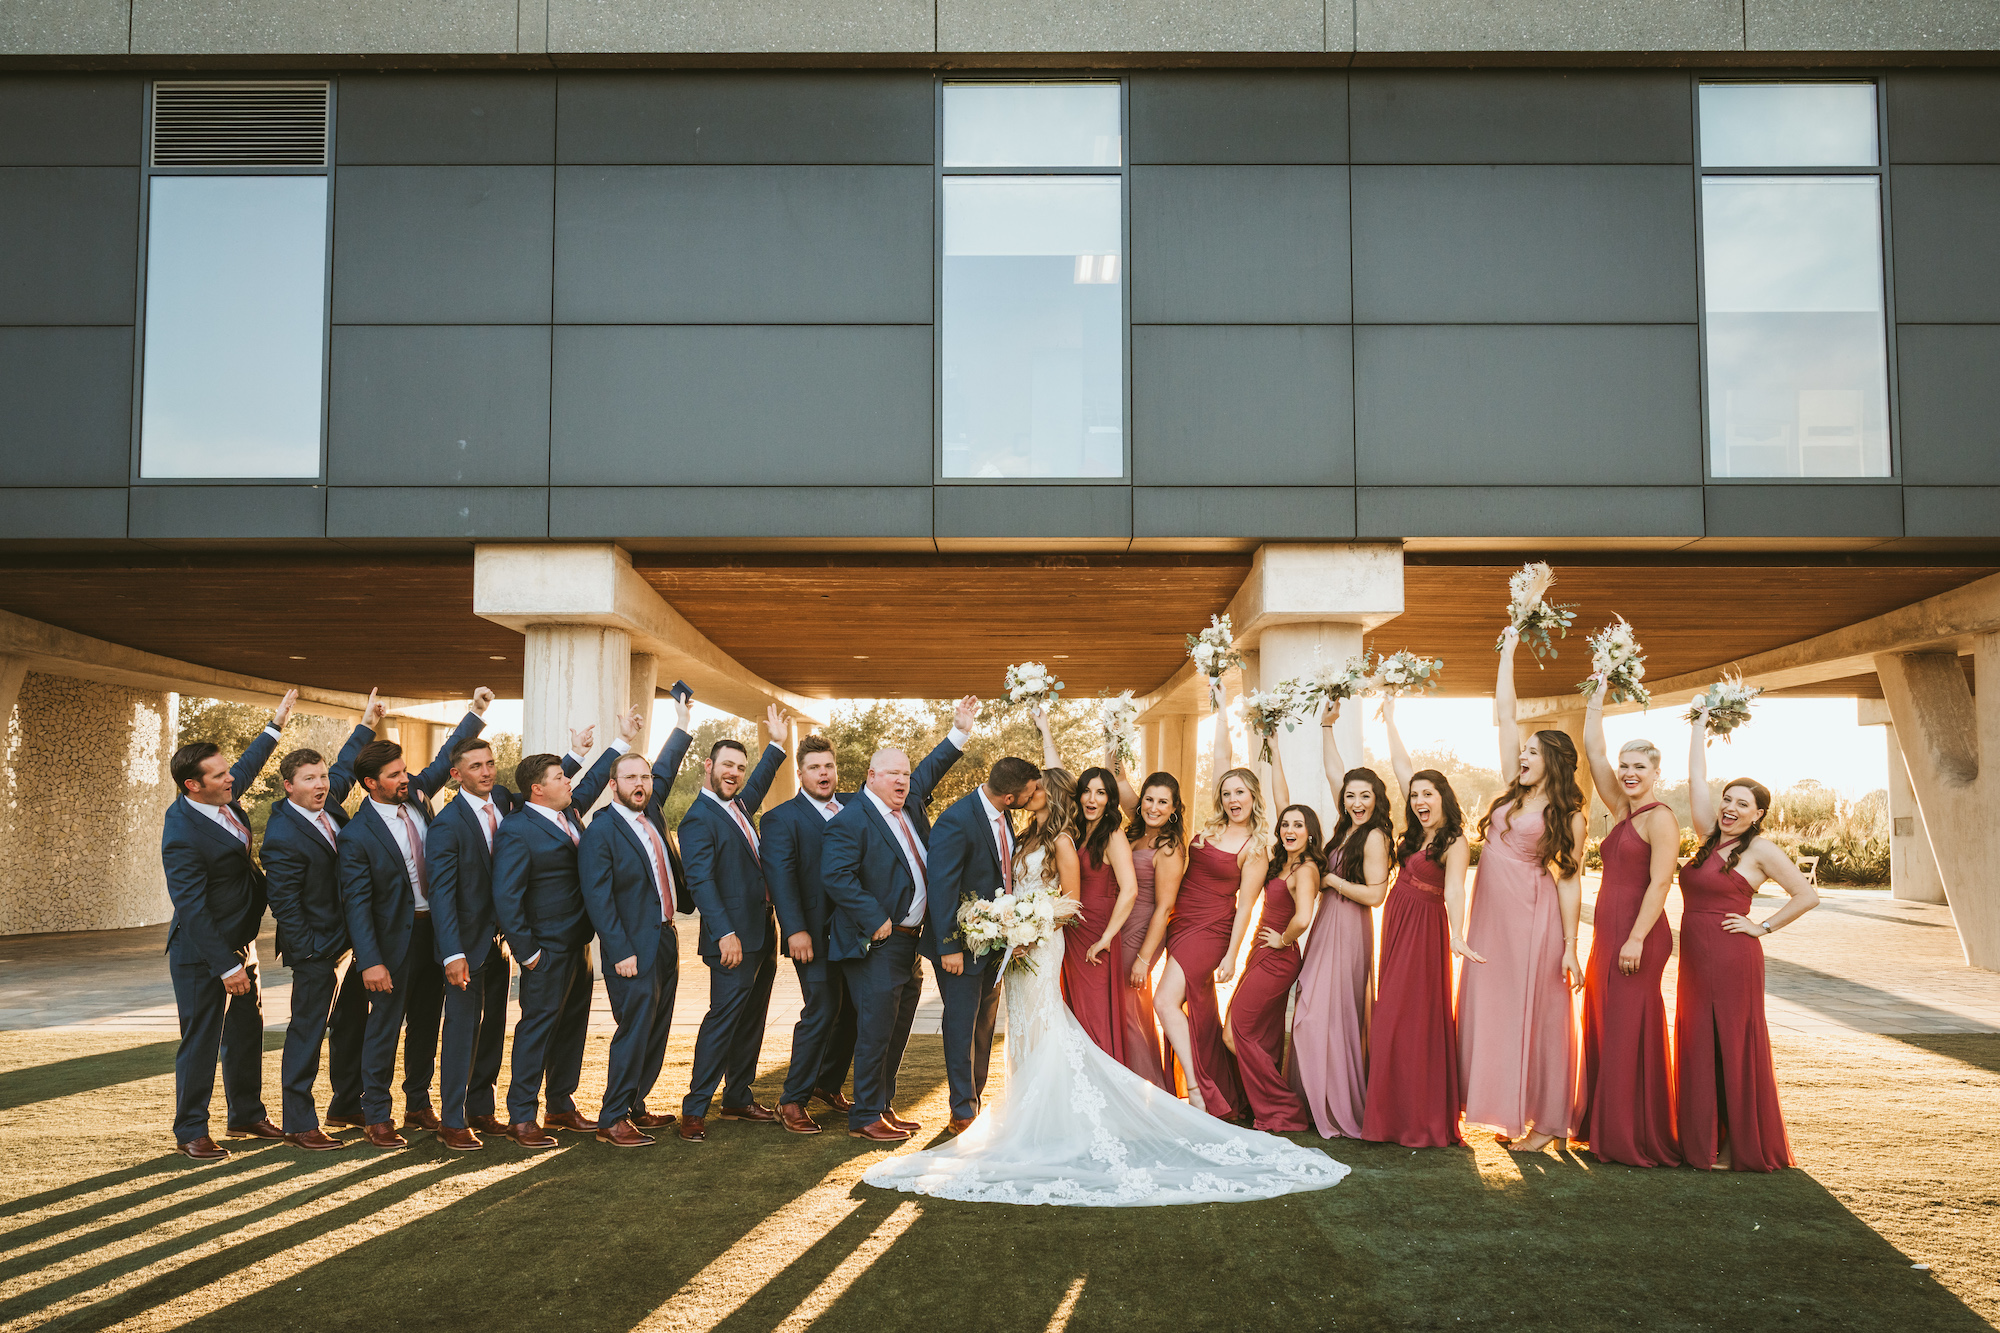 Bridal Party in Black Suits and Shades of Red and Pink Bridesmaids Dresses Portrait | Florida Photographer Mars and The Moon Films